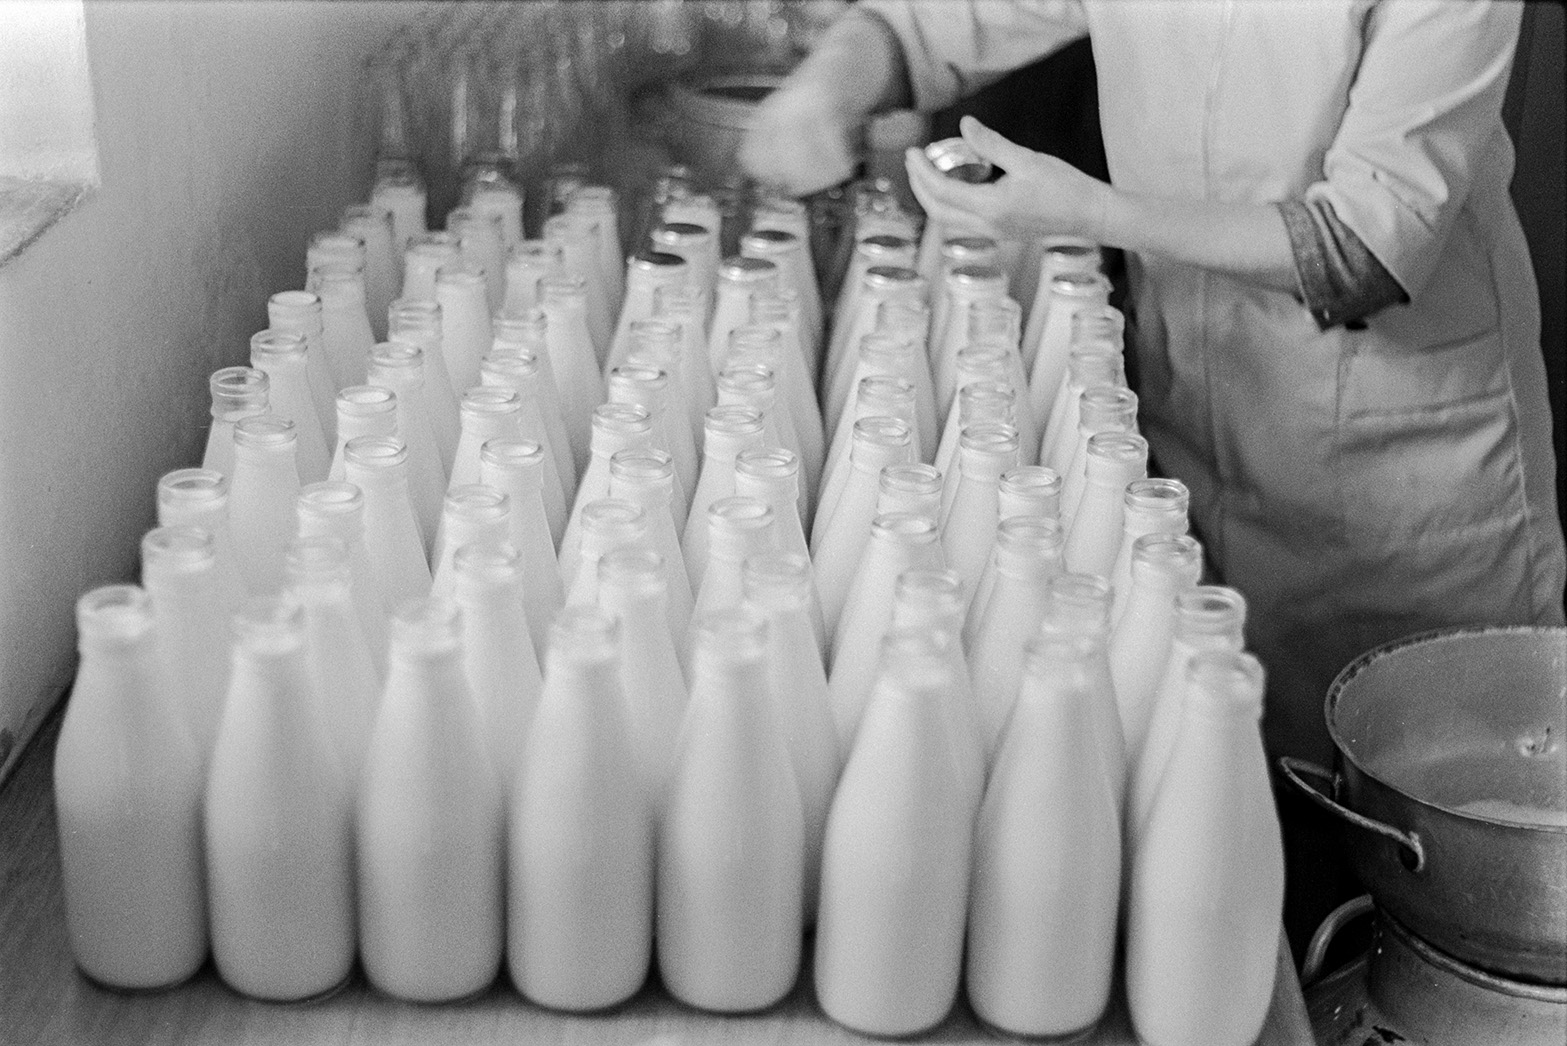 A woman fixing caps to full milk bottles in a dairy at Mill Road Farm, Beaford. The farm was also known as Jeffrys.